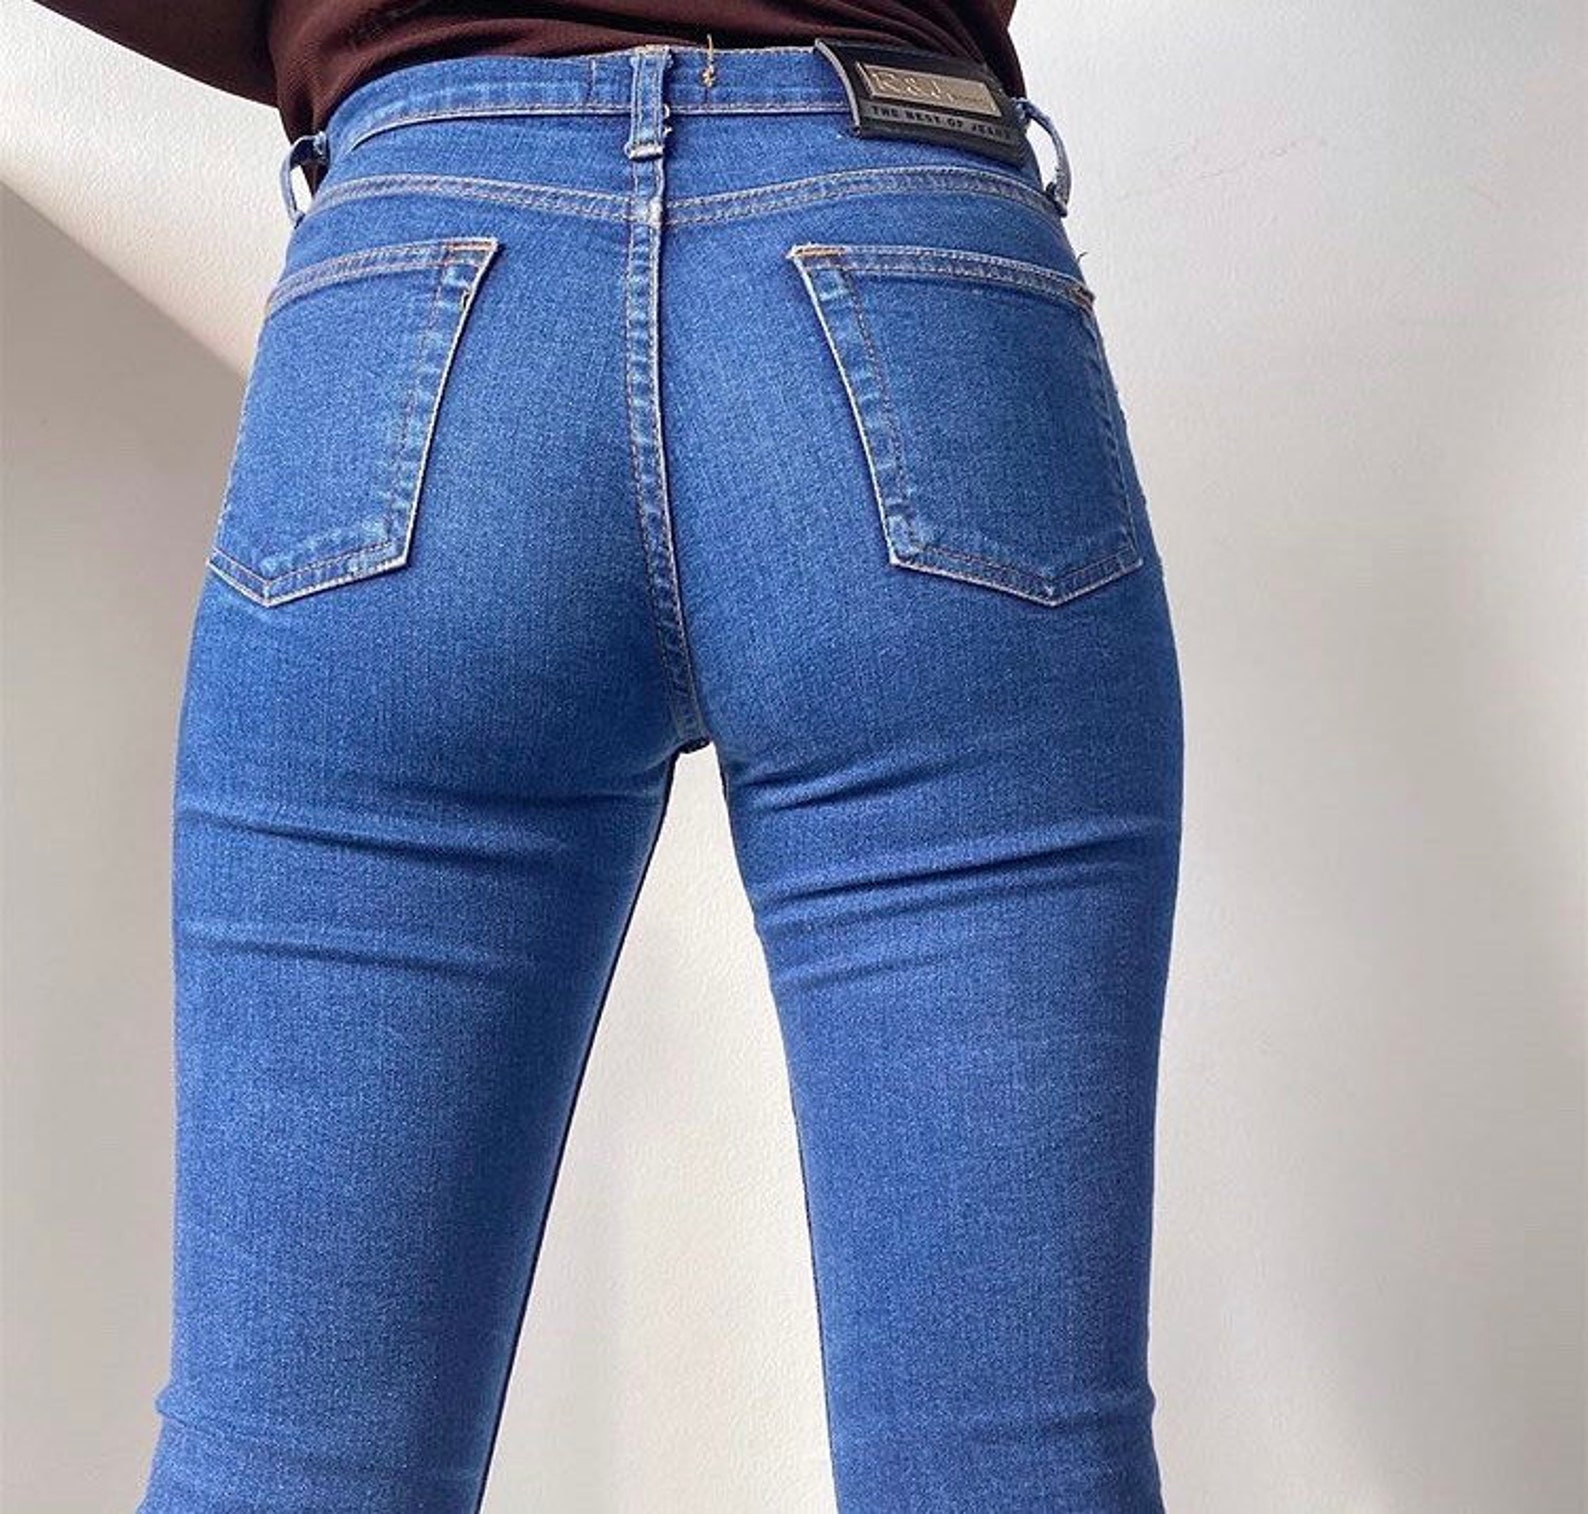 Early 2000s Jeans - Etsy